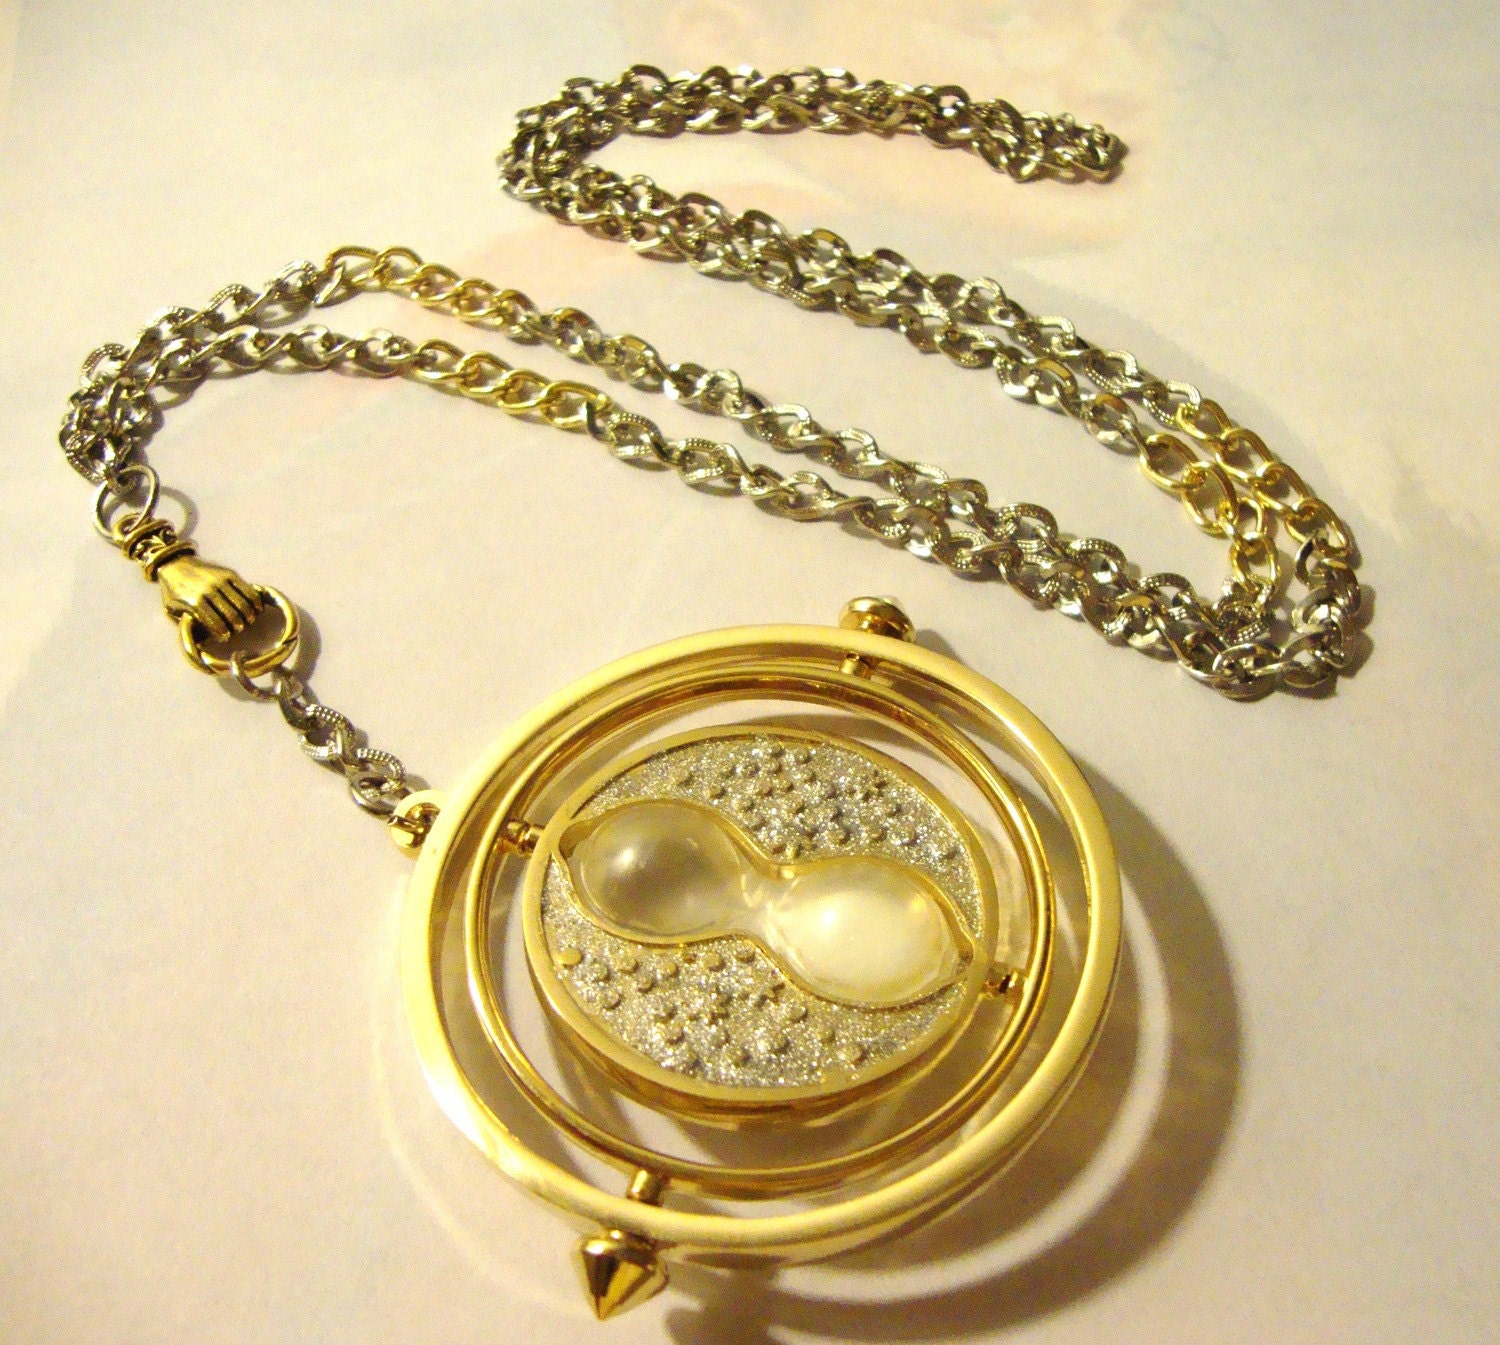 Harry Potter Time Turner Necklace in Hand Silver & Gold with